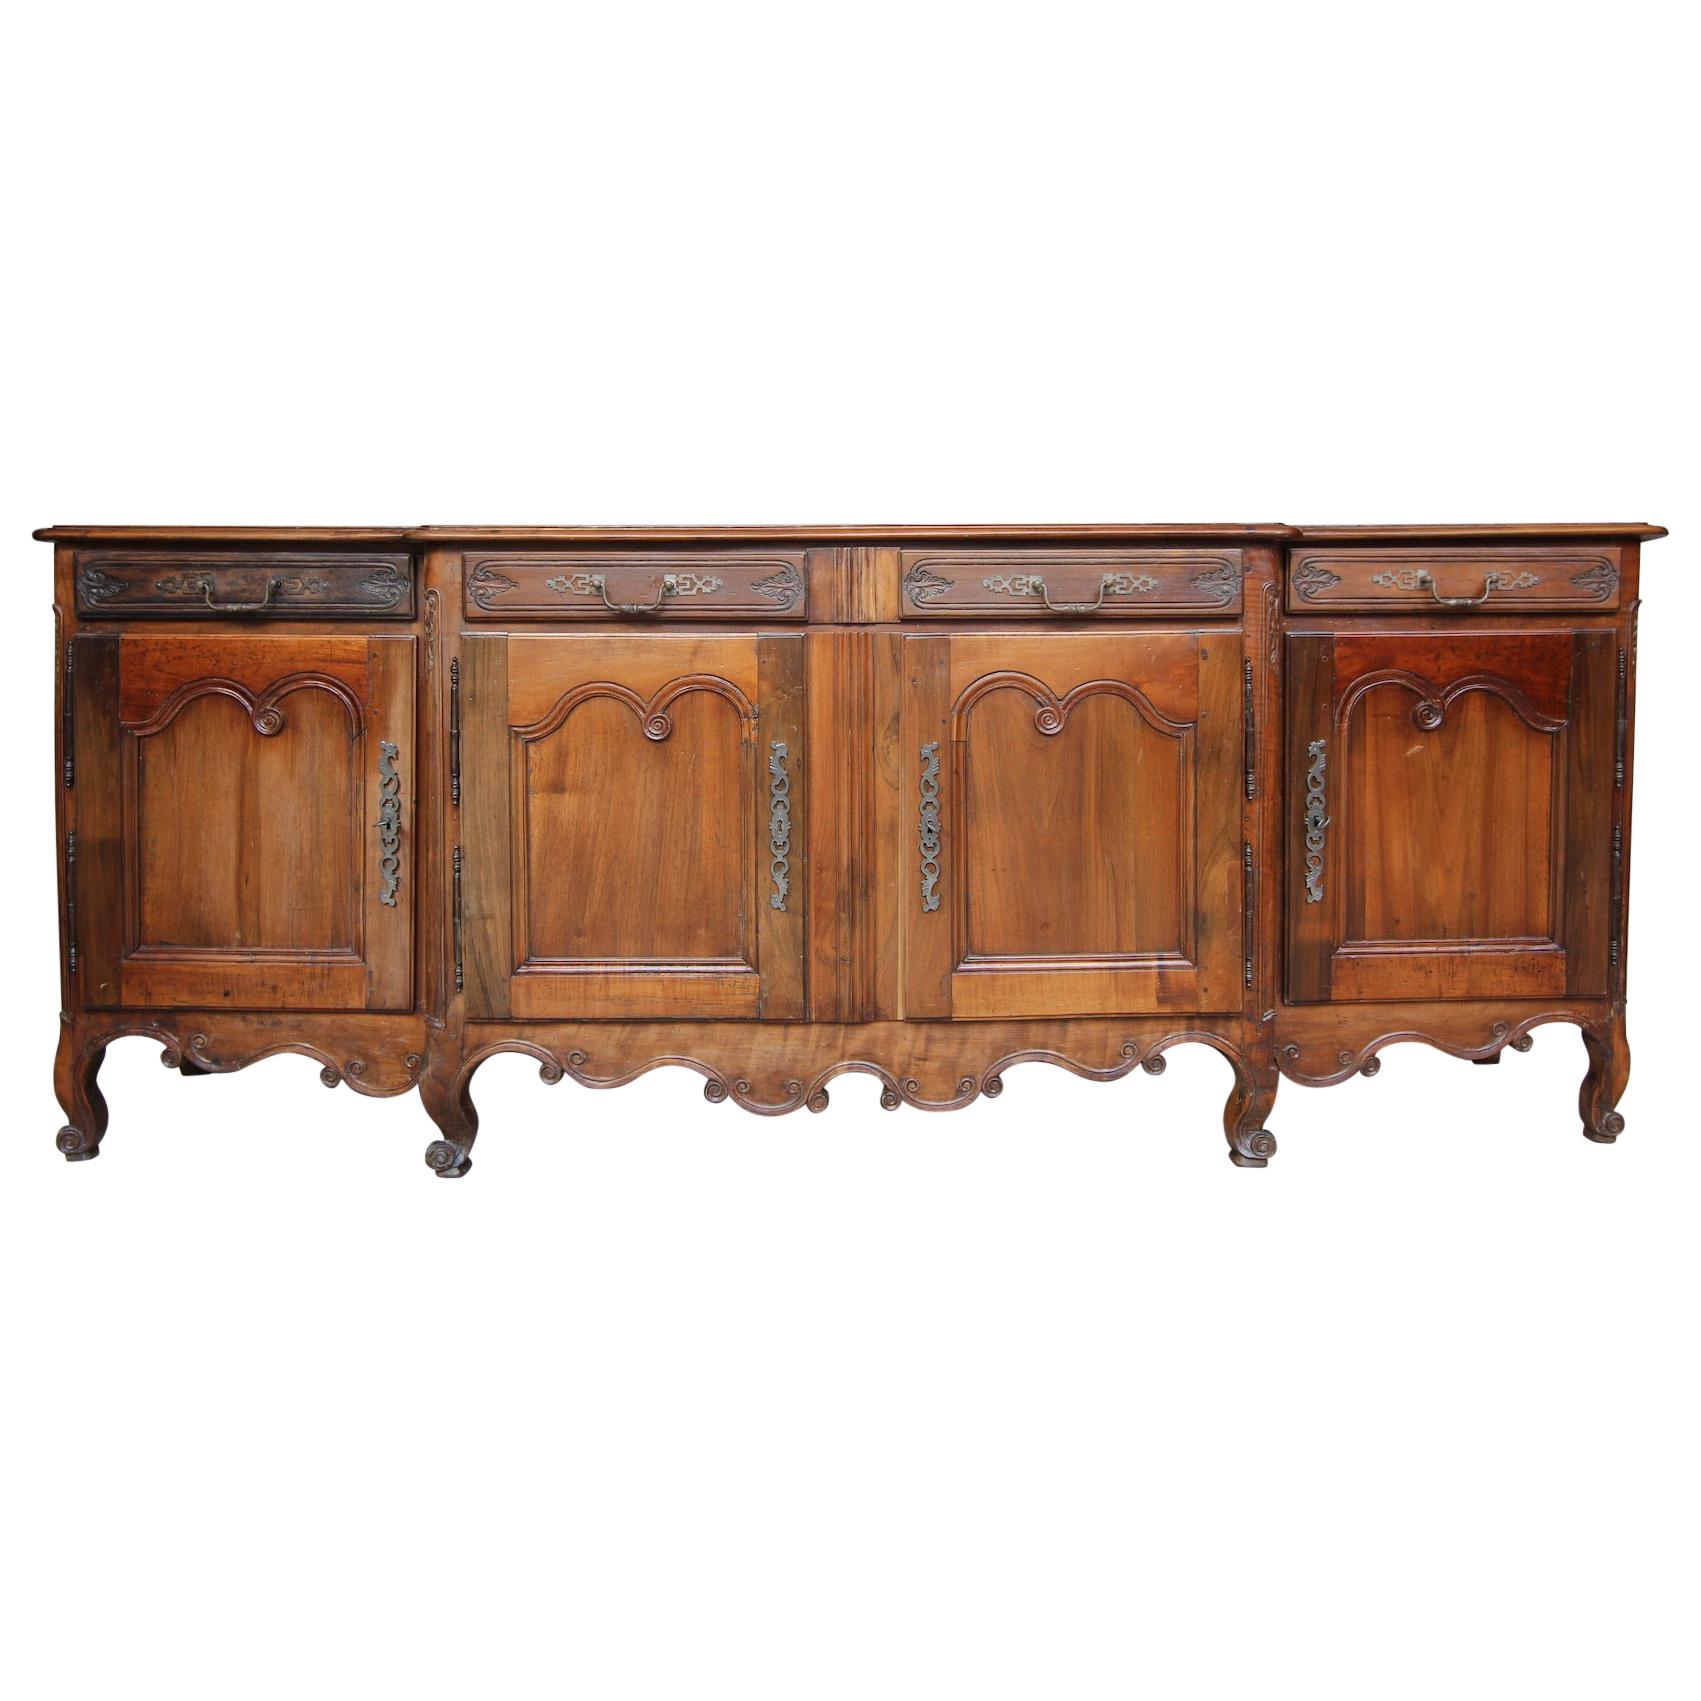 18th Century French Louis XV Sideboard or Buffet Made of Walnut